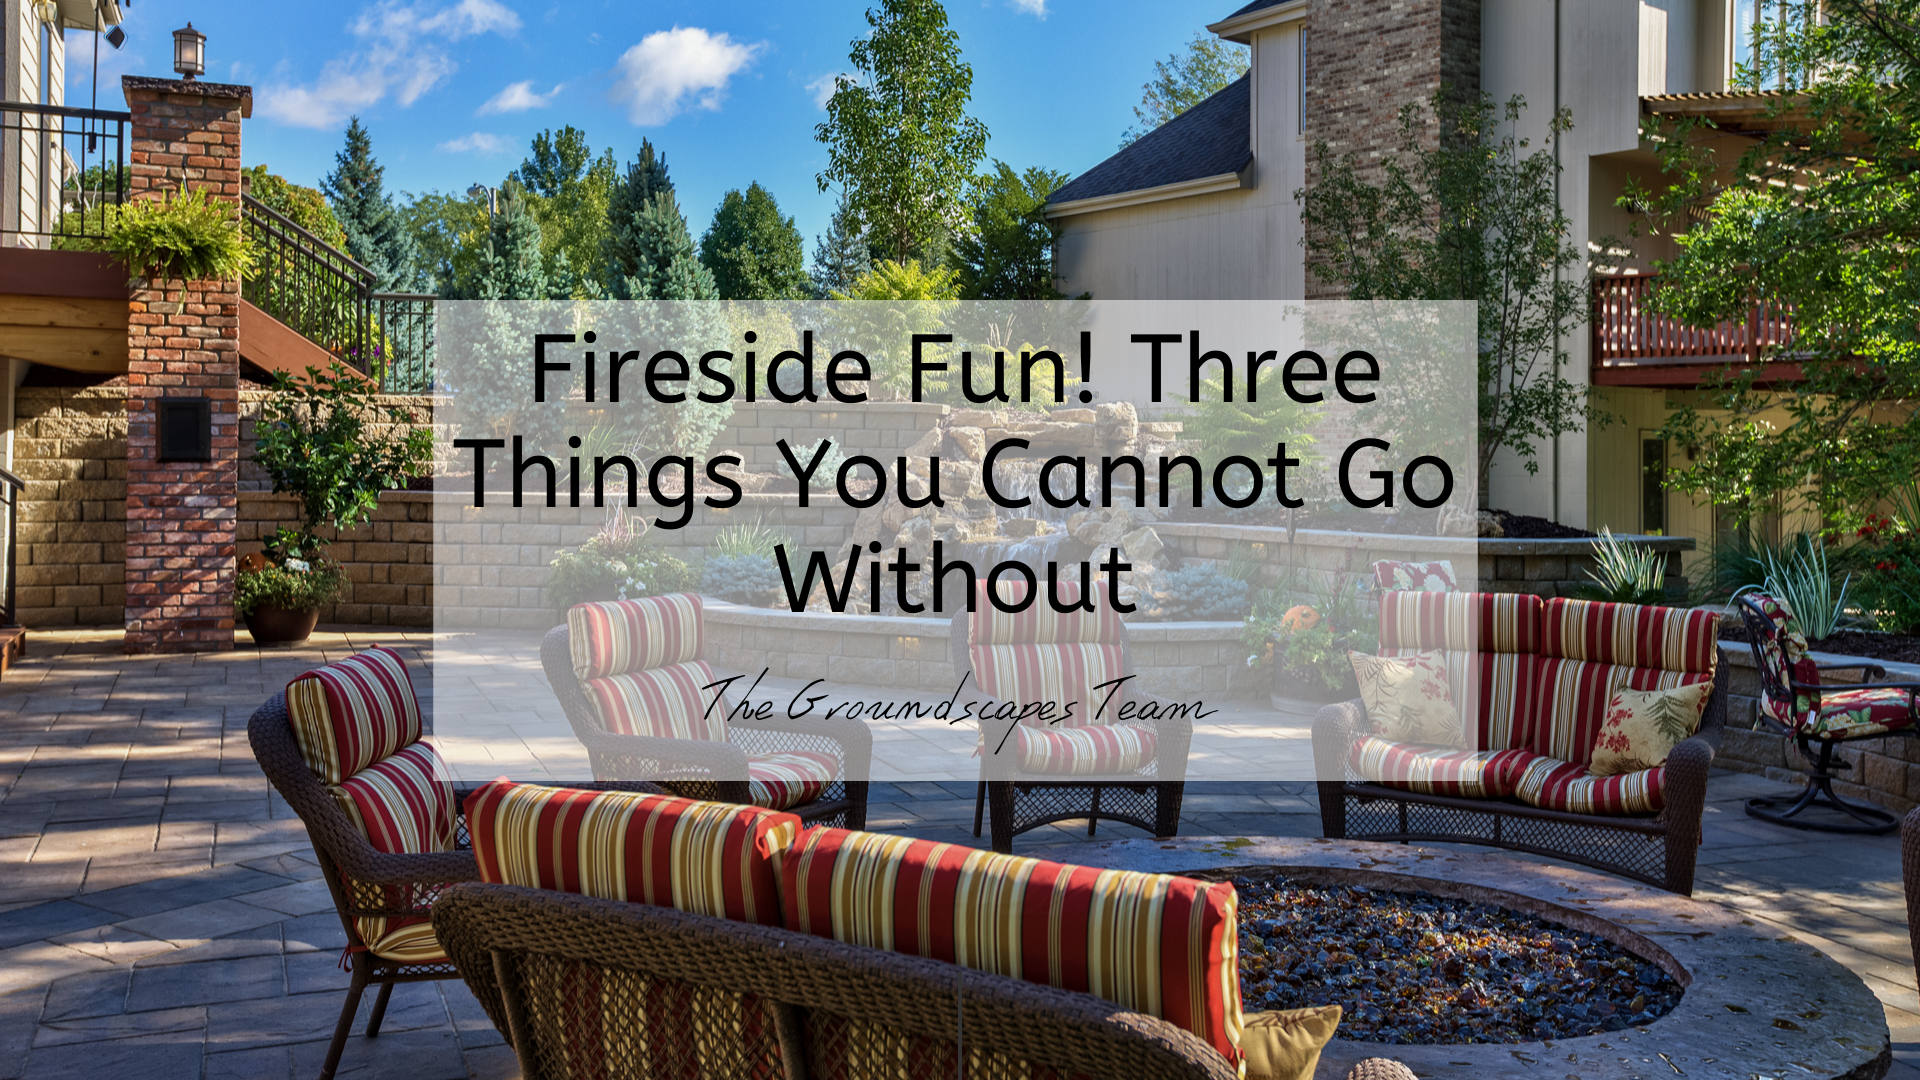 Fireside Fun! Three Things You Cannot Go Without